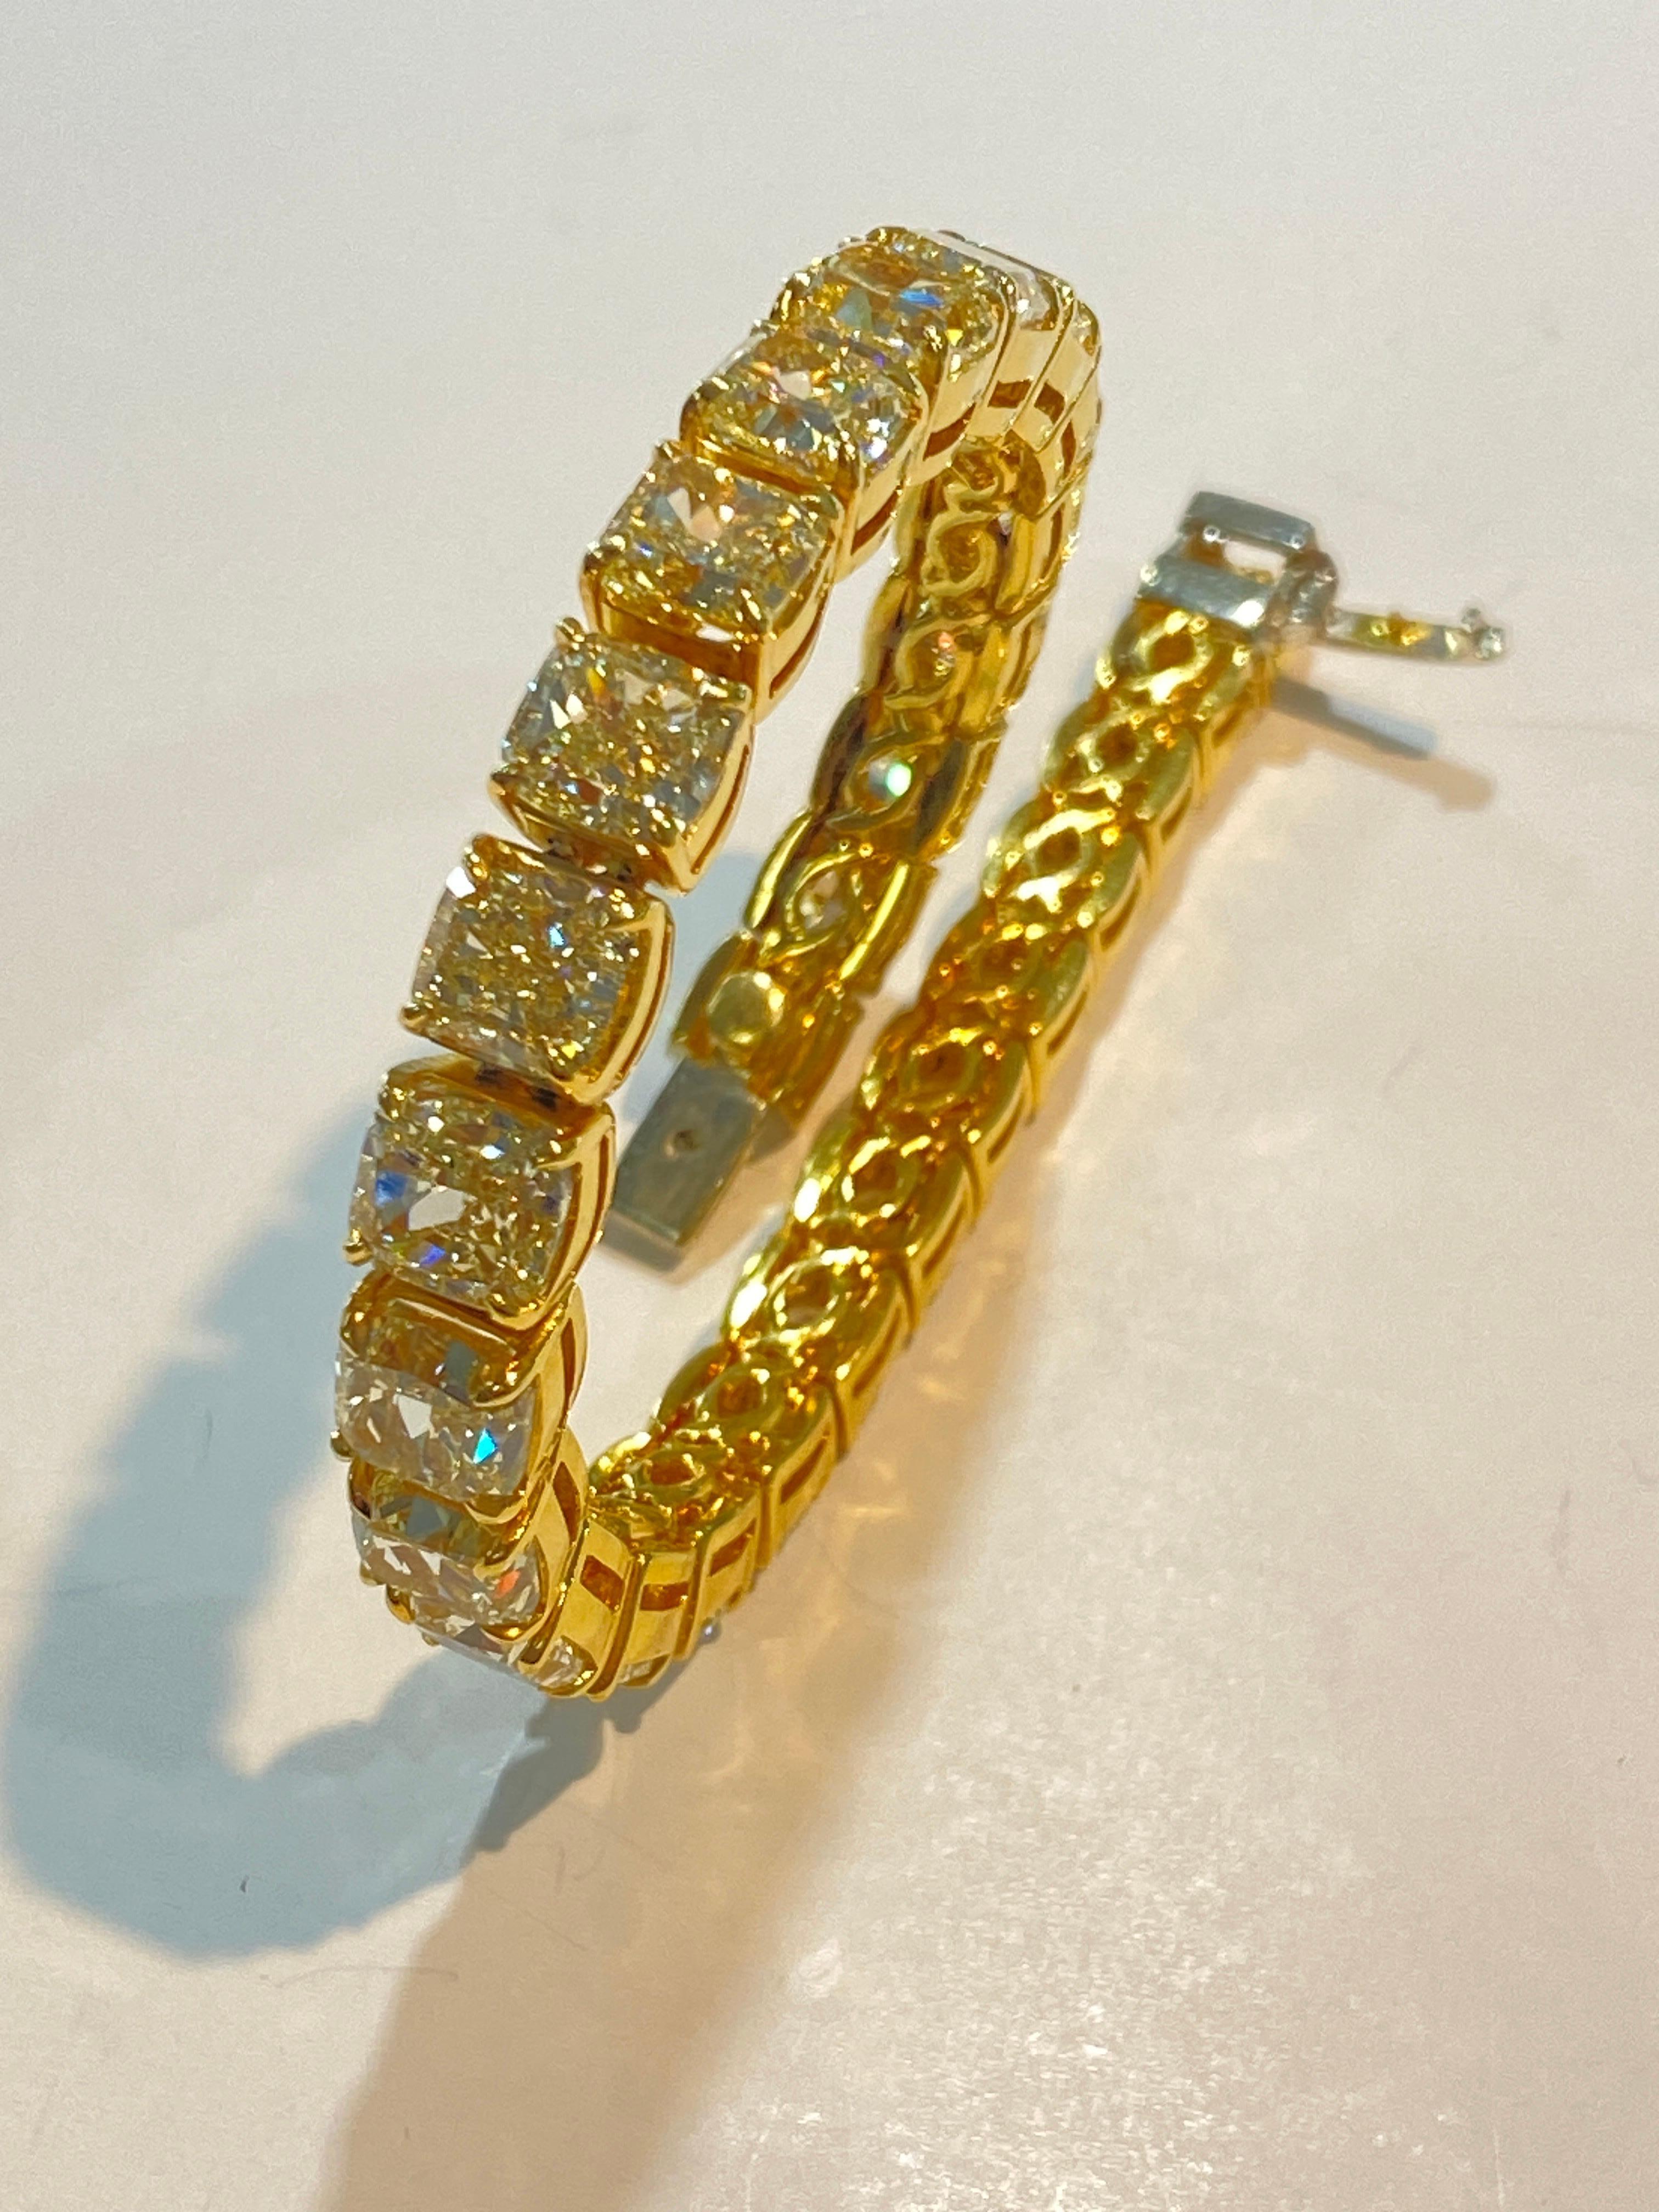 18 Karat gold, fancy yellow diamond bracelet consisting of twenty-eight cushion cut diamonds set in a four-prong, yellow gold setting. The bracelet measures a height of 6.62 inches. The length is 7.13 inches. The total weight of the diamonds is